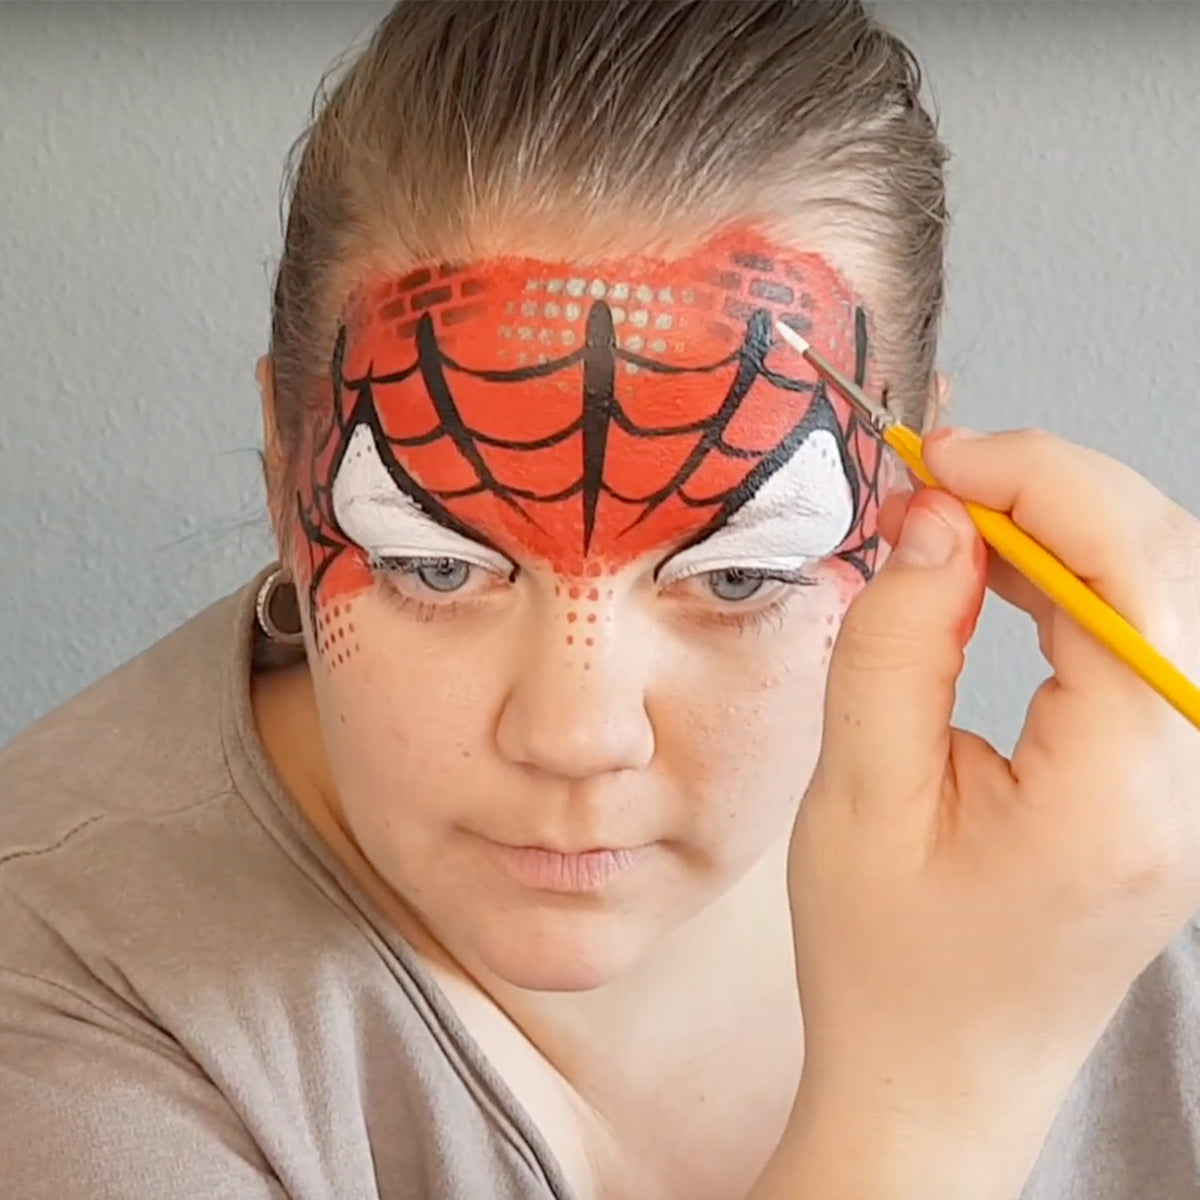 All About Online Face Painting Groups & Communities